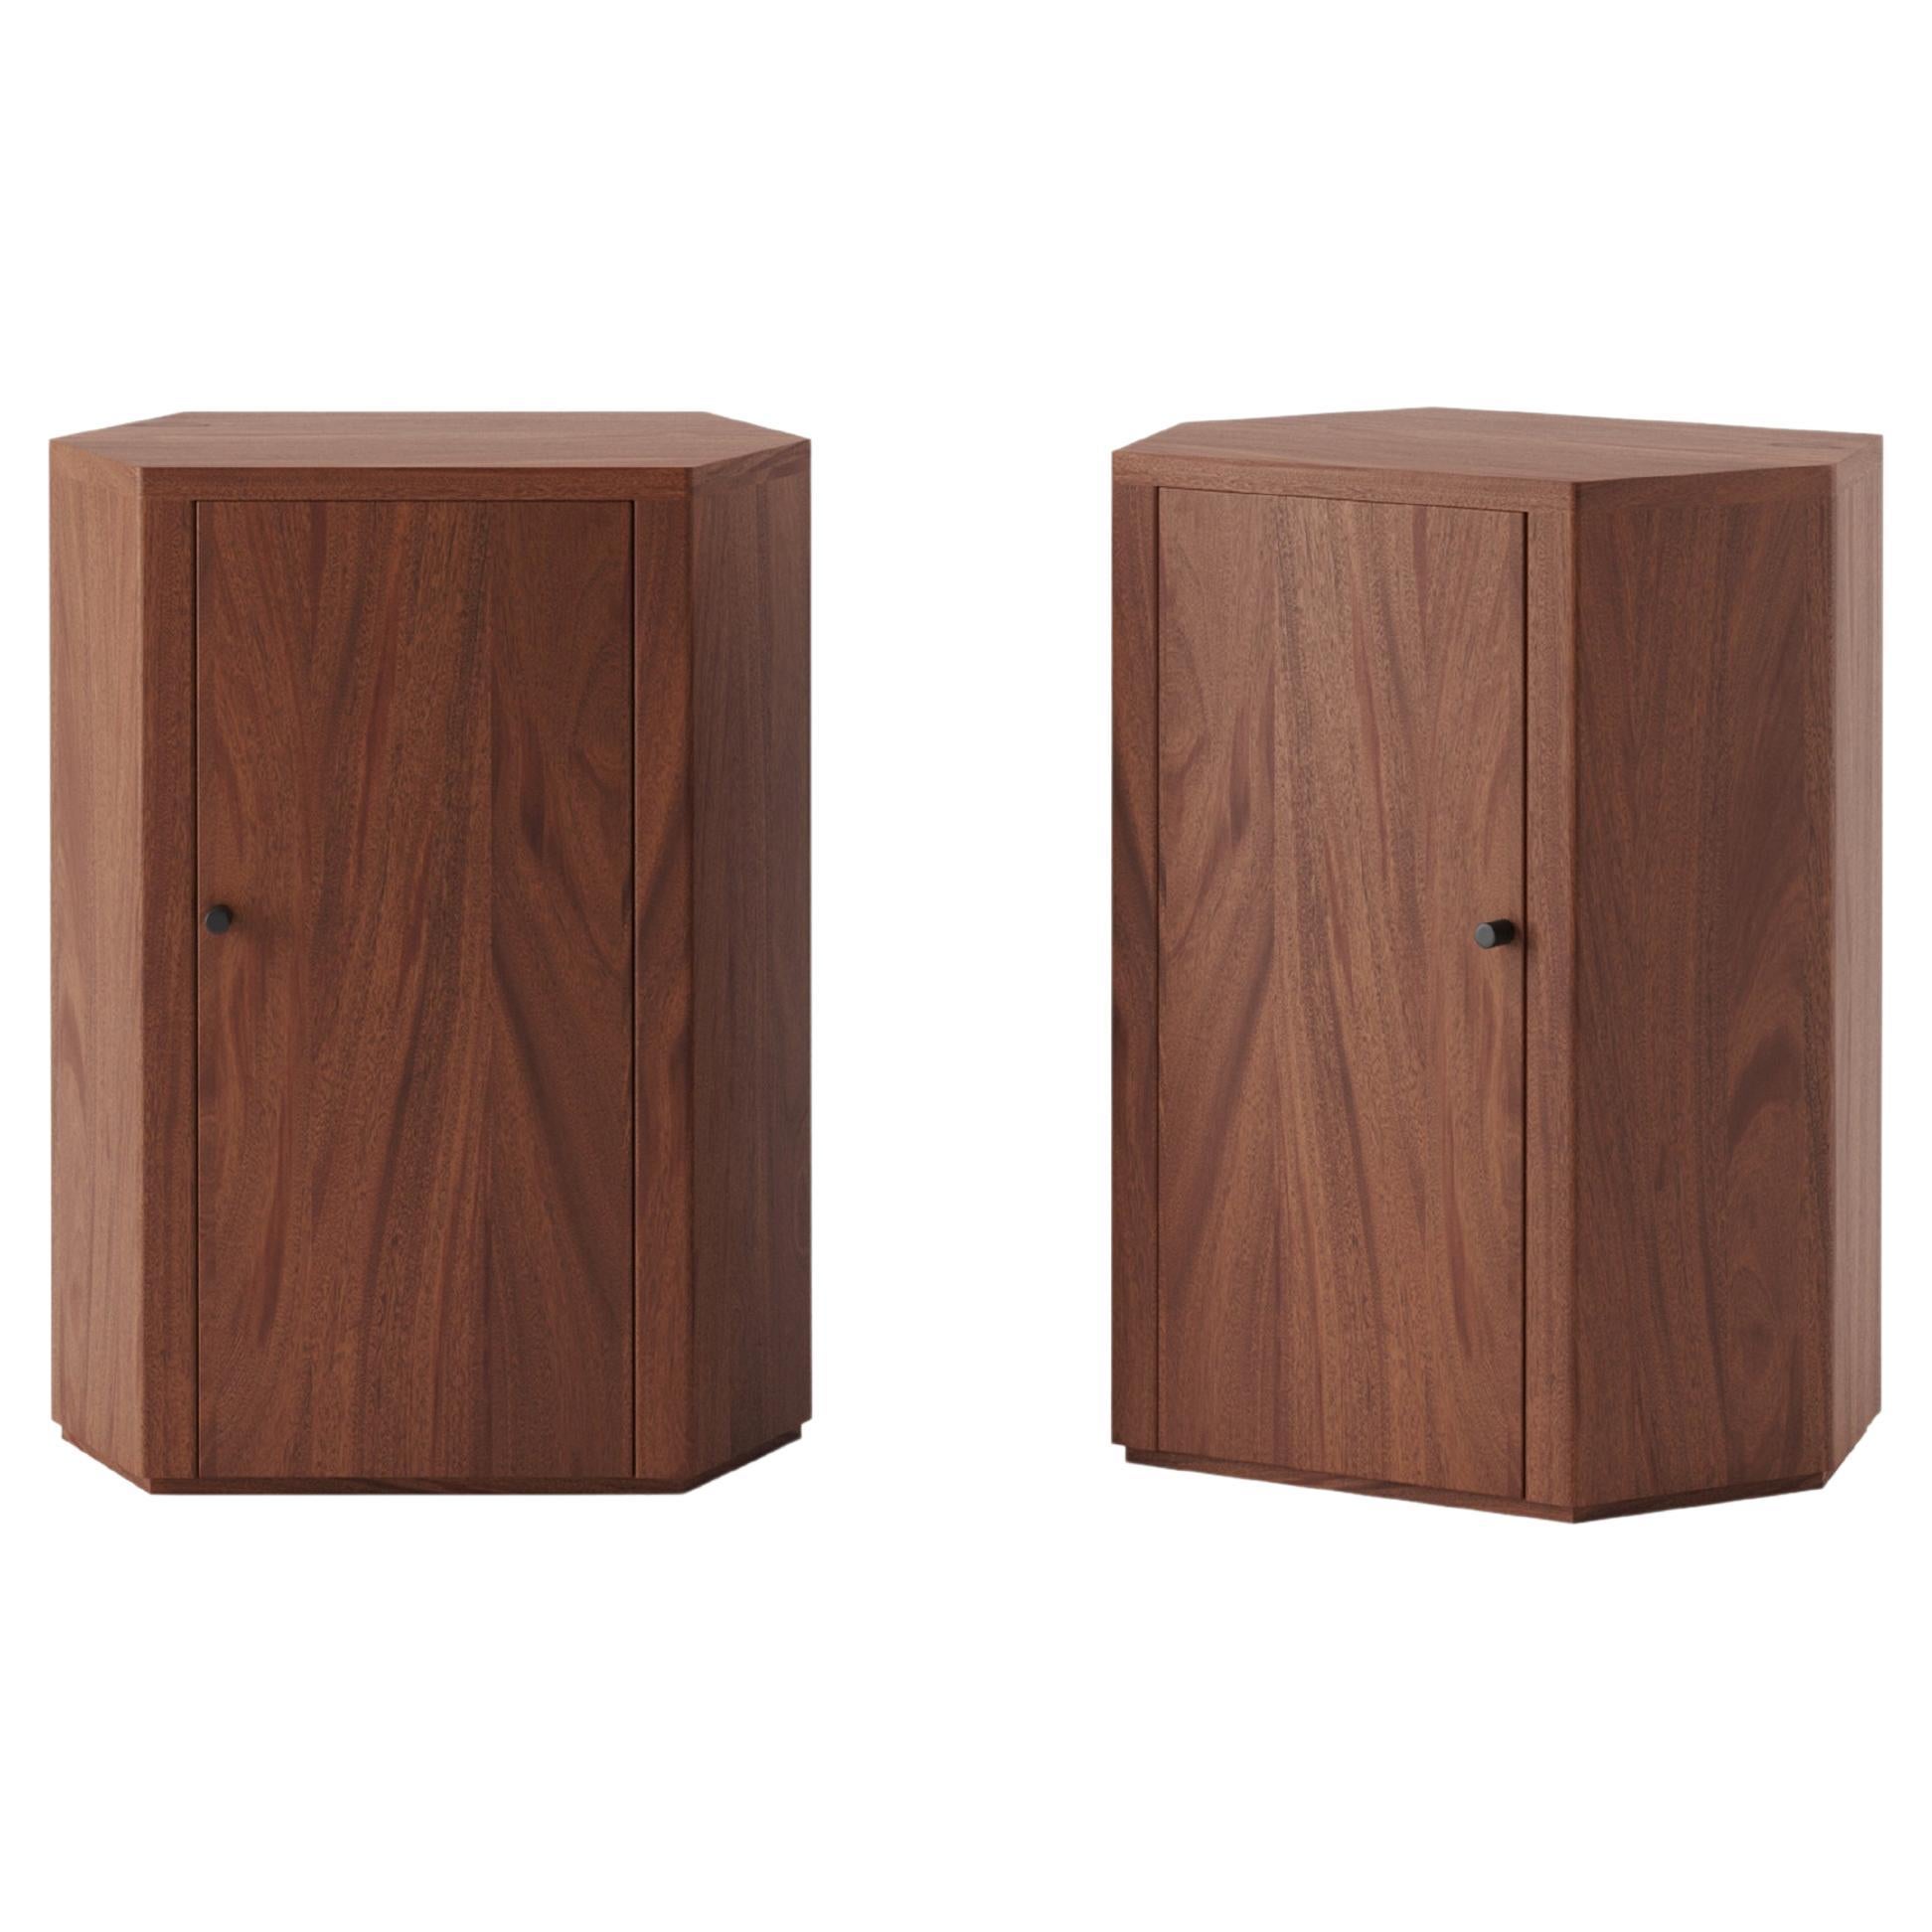 Pair of Park Night Stands in African Mahogany by Yaniv Chen for Lemon